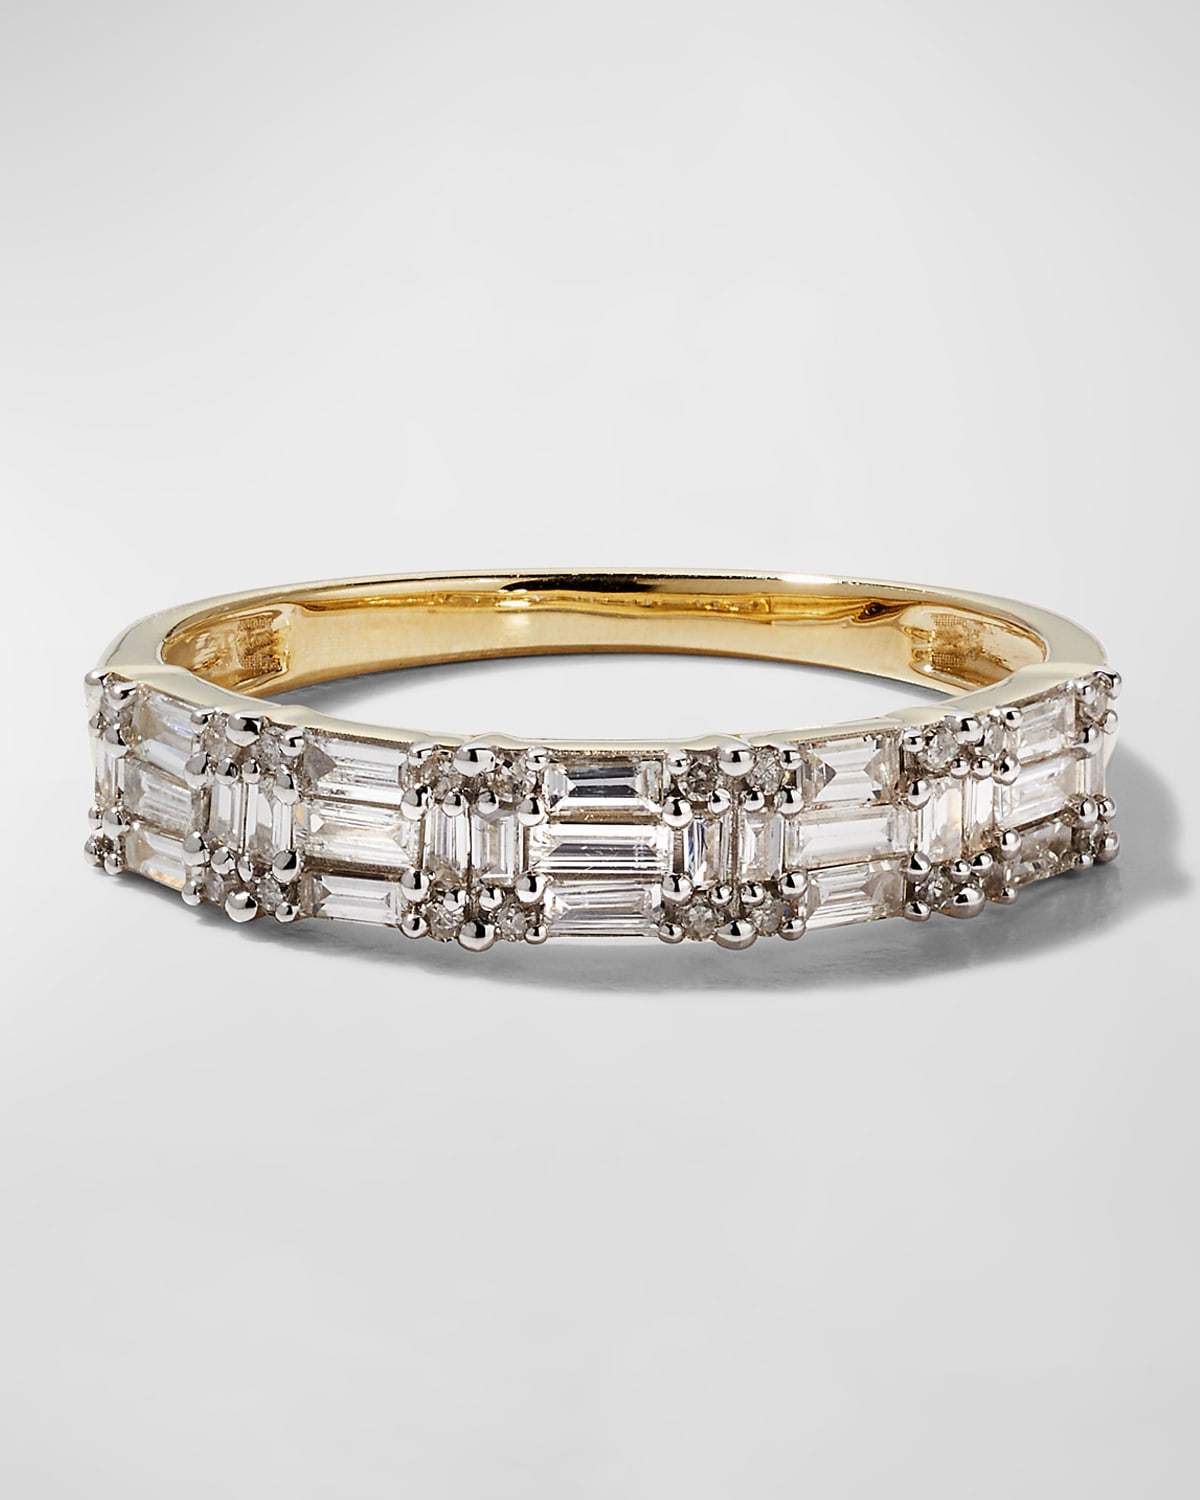 Deluxe Shield of Strength Diamond Ring